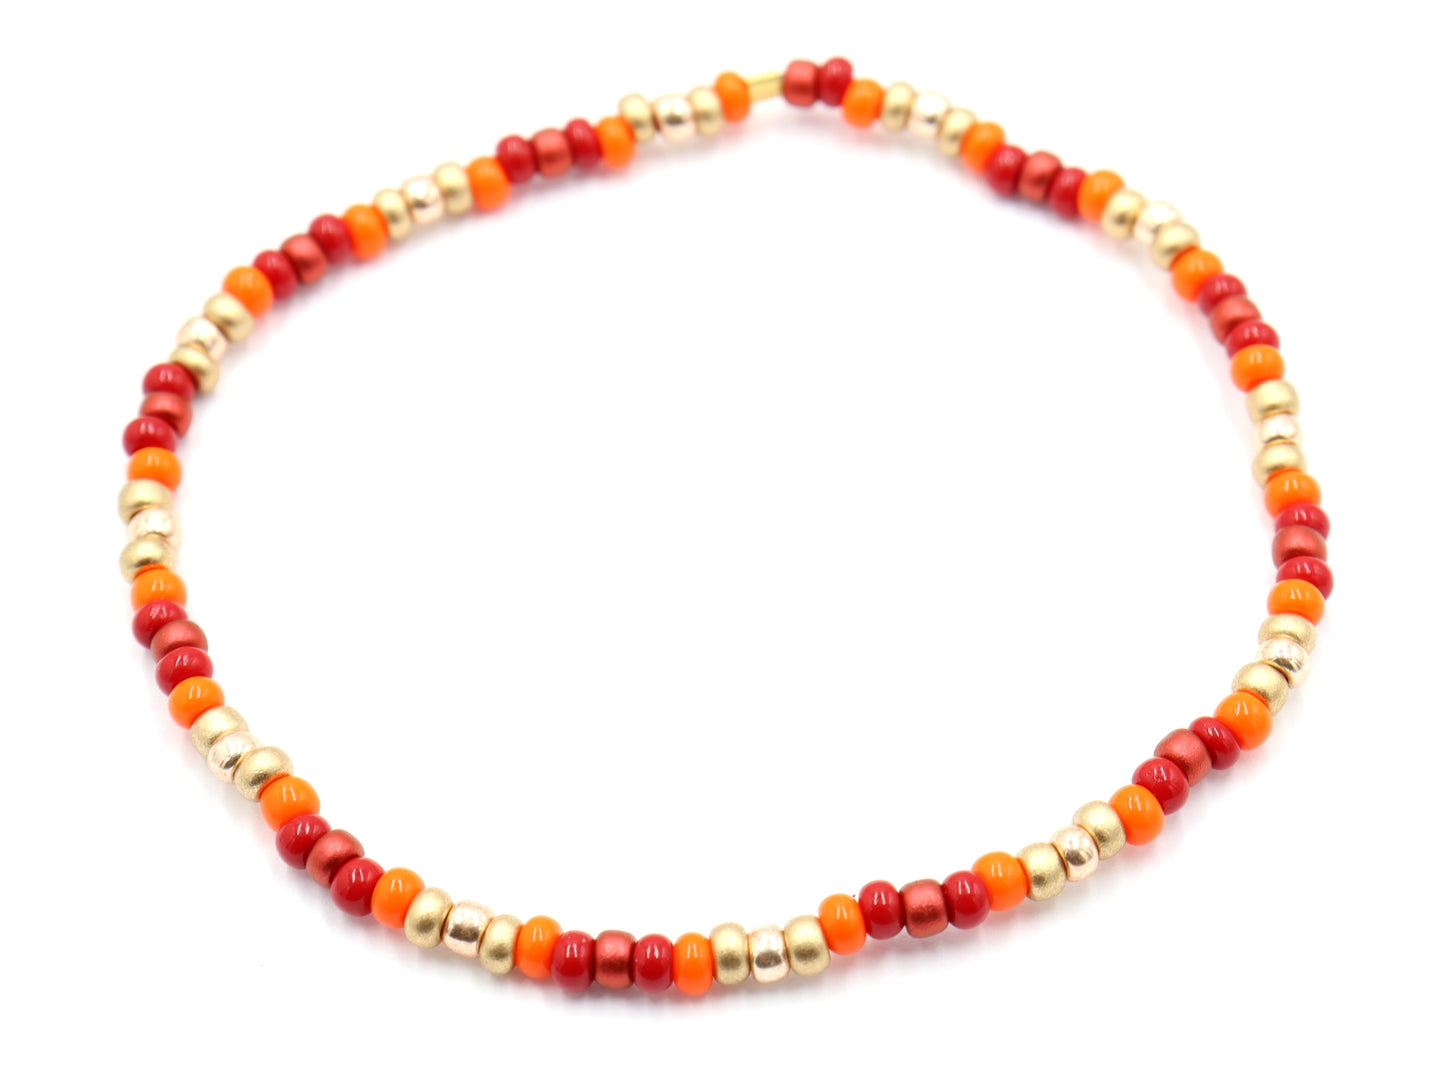 Red Yellow and Orange Your Glad It's Fall Y'all Glass Bead Stretch Bracelet by Monkey's Mojo